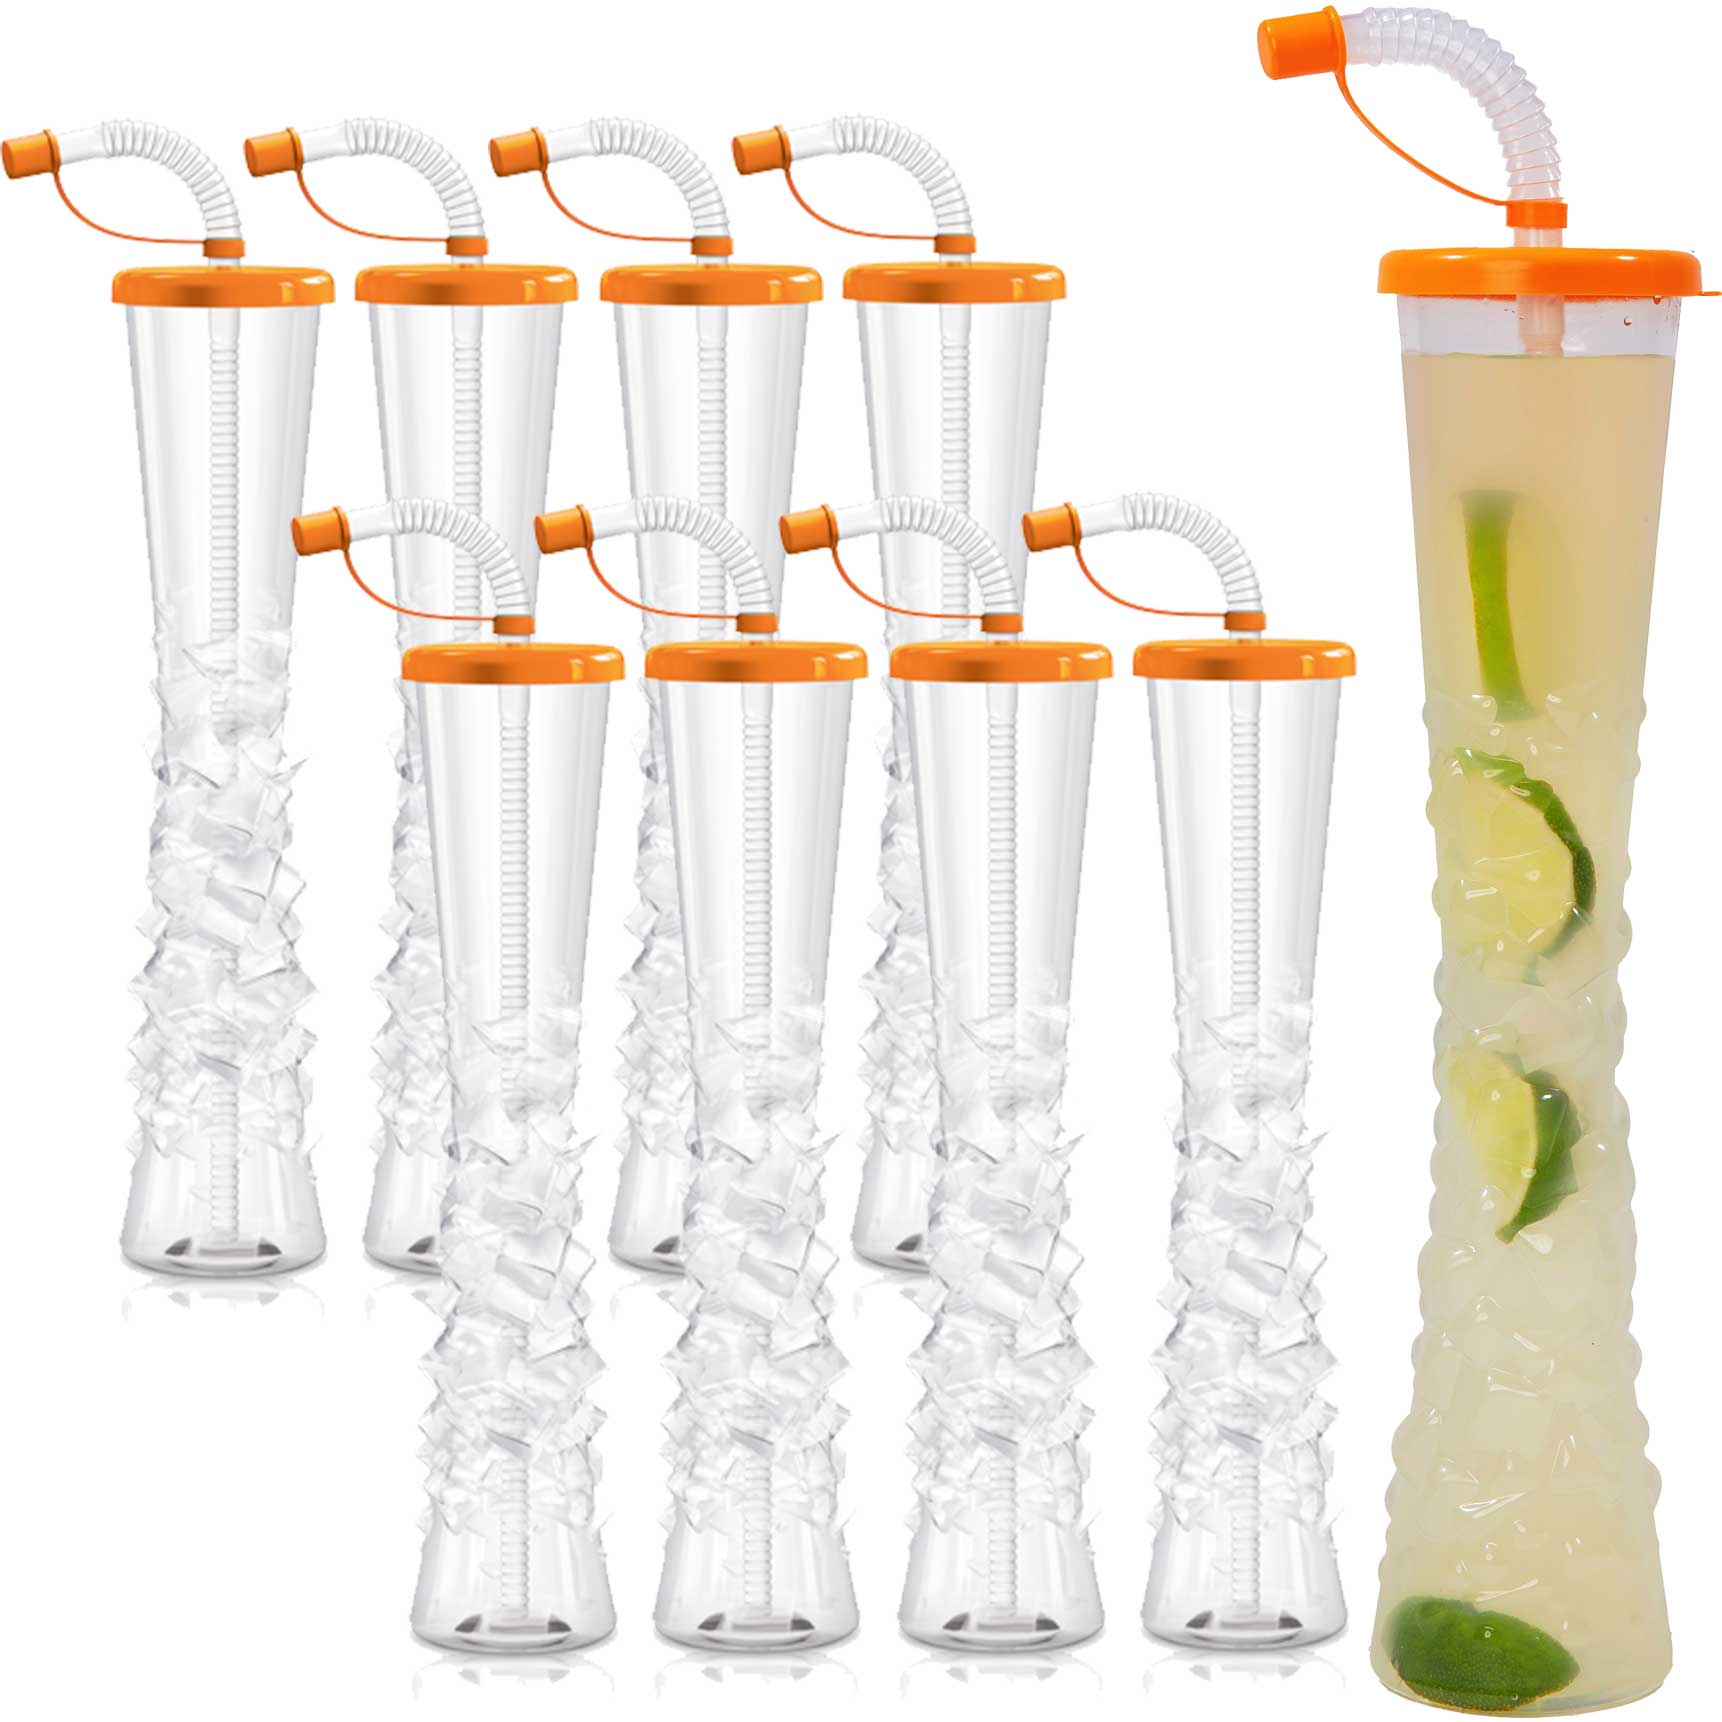 (54 or 108 Cups) Yard Cups with Orange Lids and Straws - 14oz - for Margaritas, Cold Drinks, Frozen Drinks, Kids Party